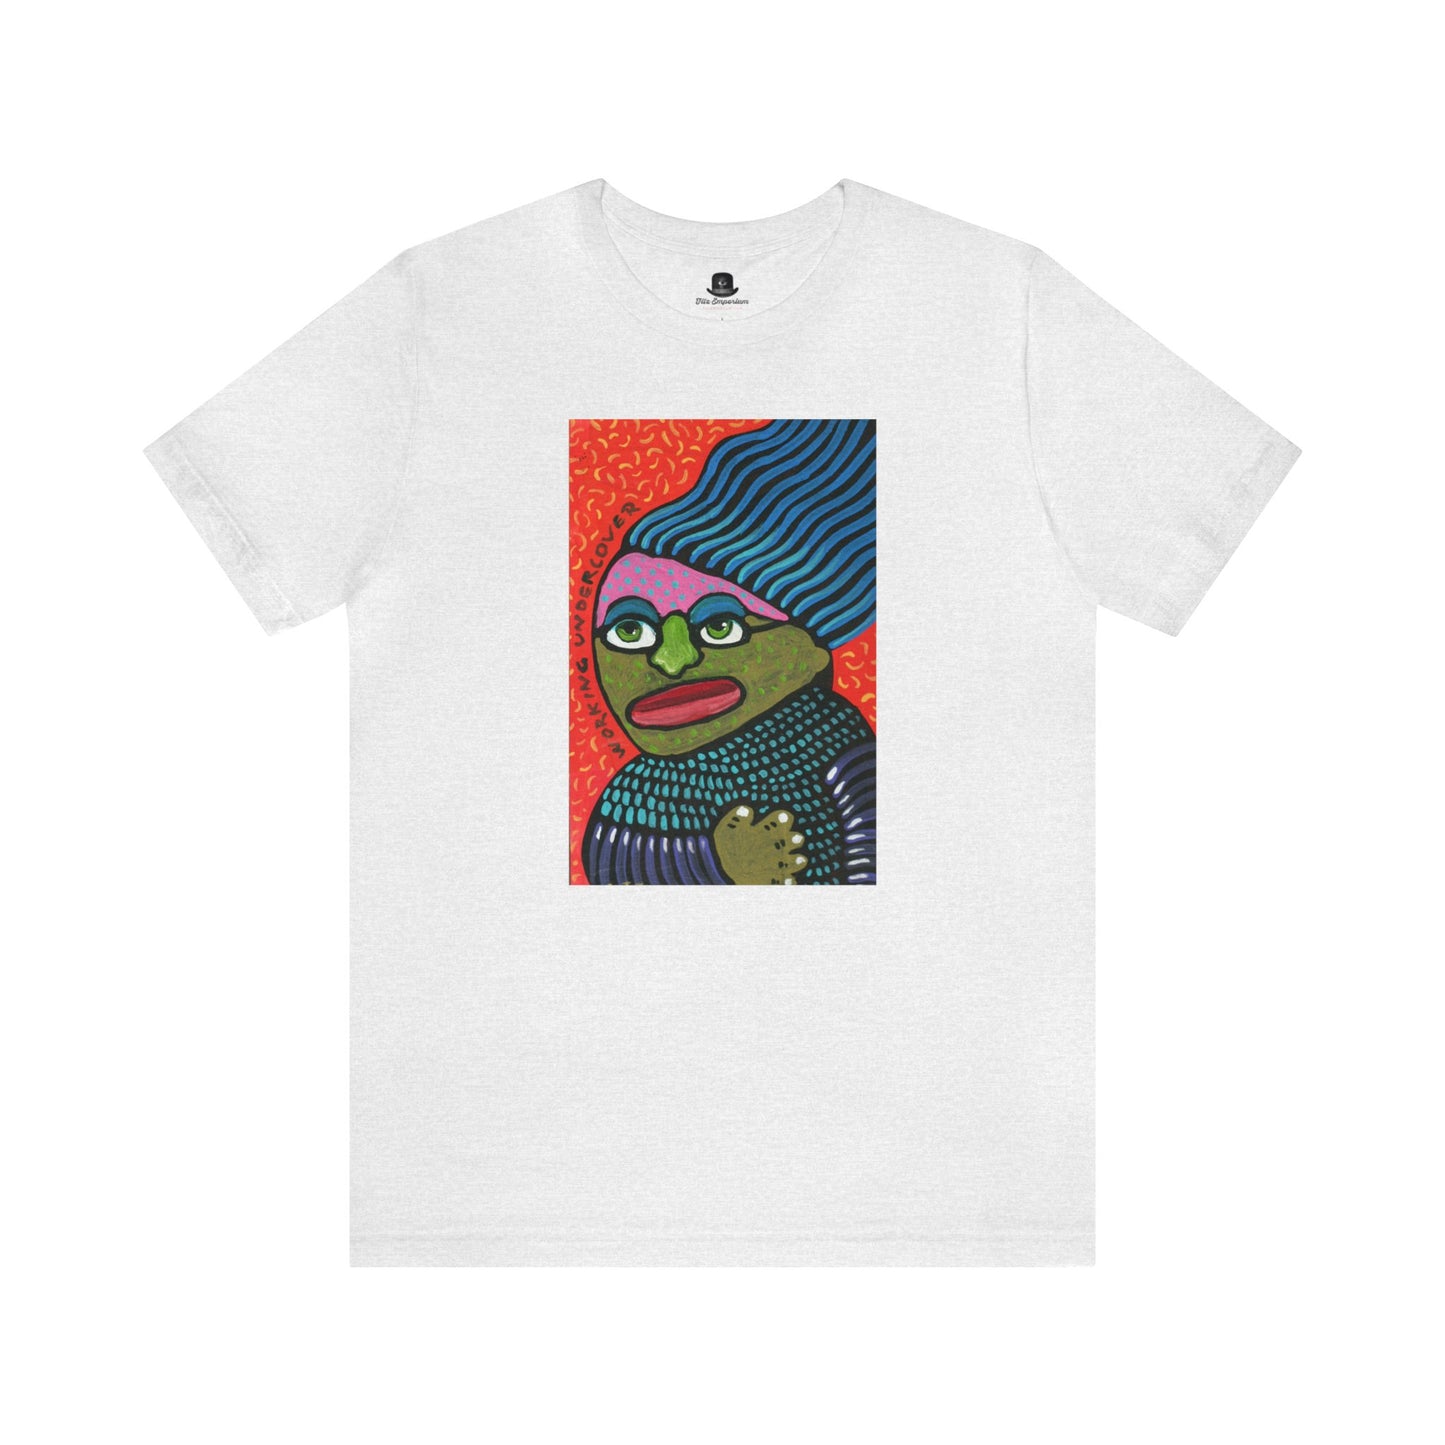 Working Undercover painting short sleeve tee